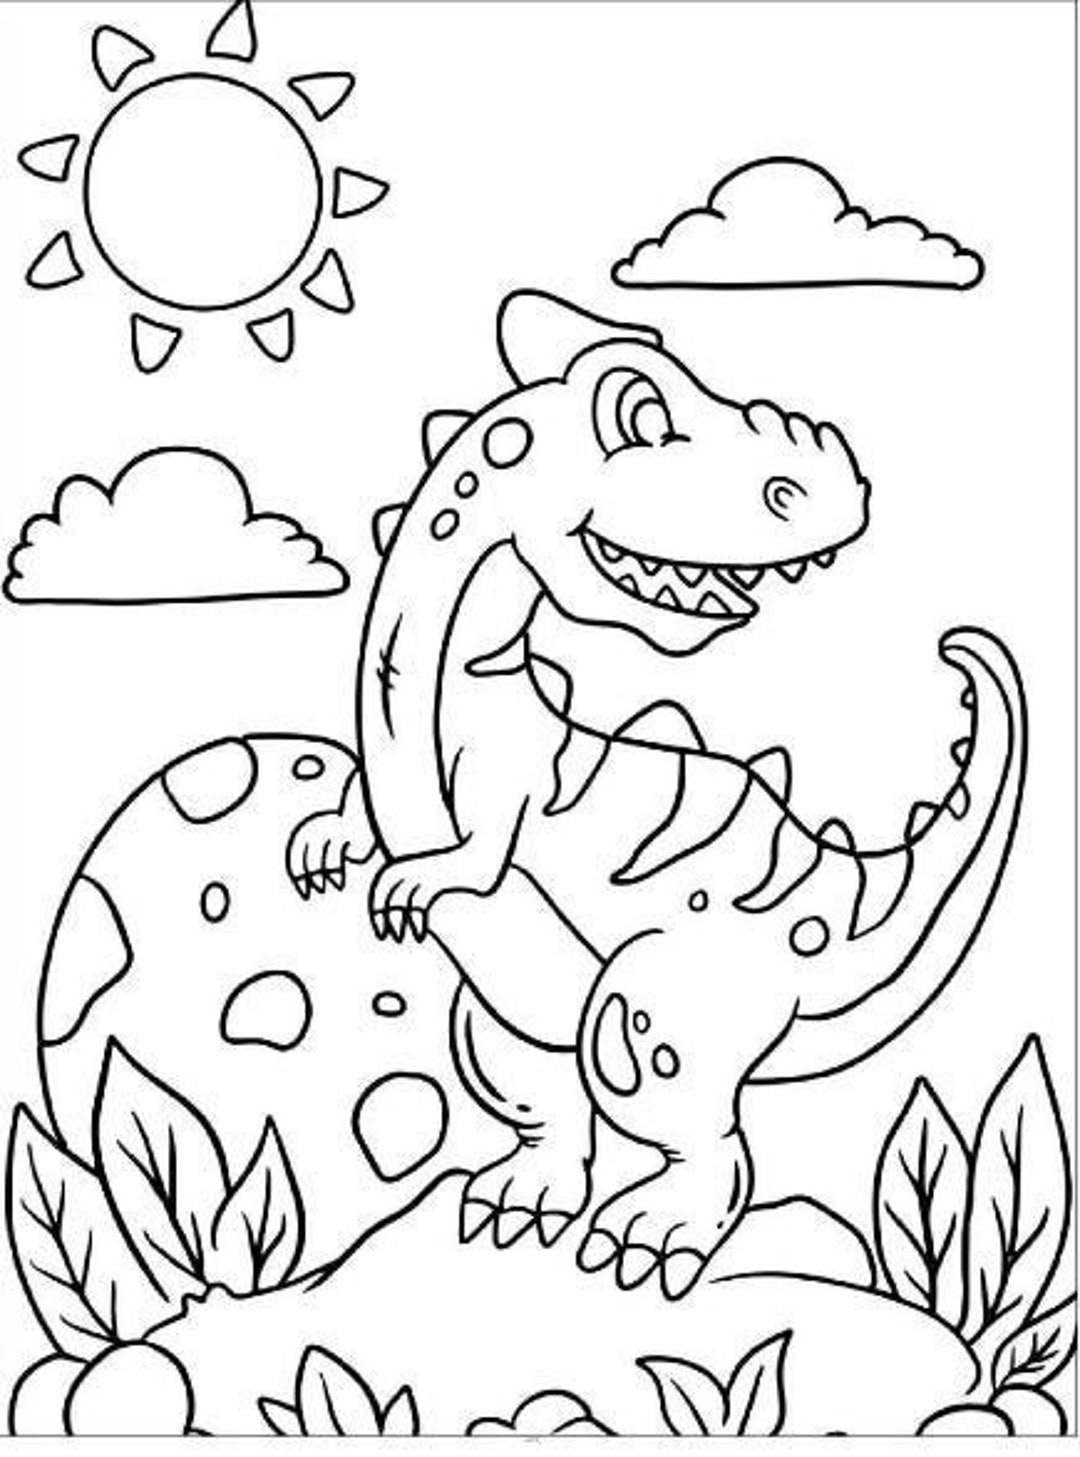 Dinosaur Coloring Books For Toddlers: A toddlers coloring books